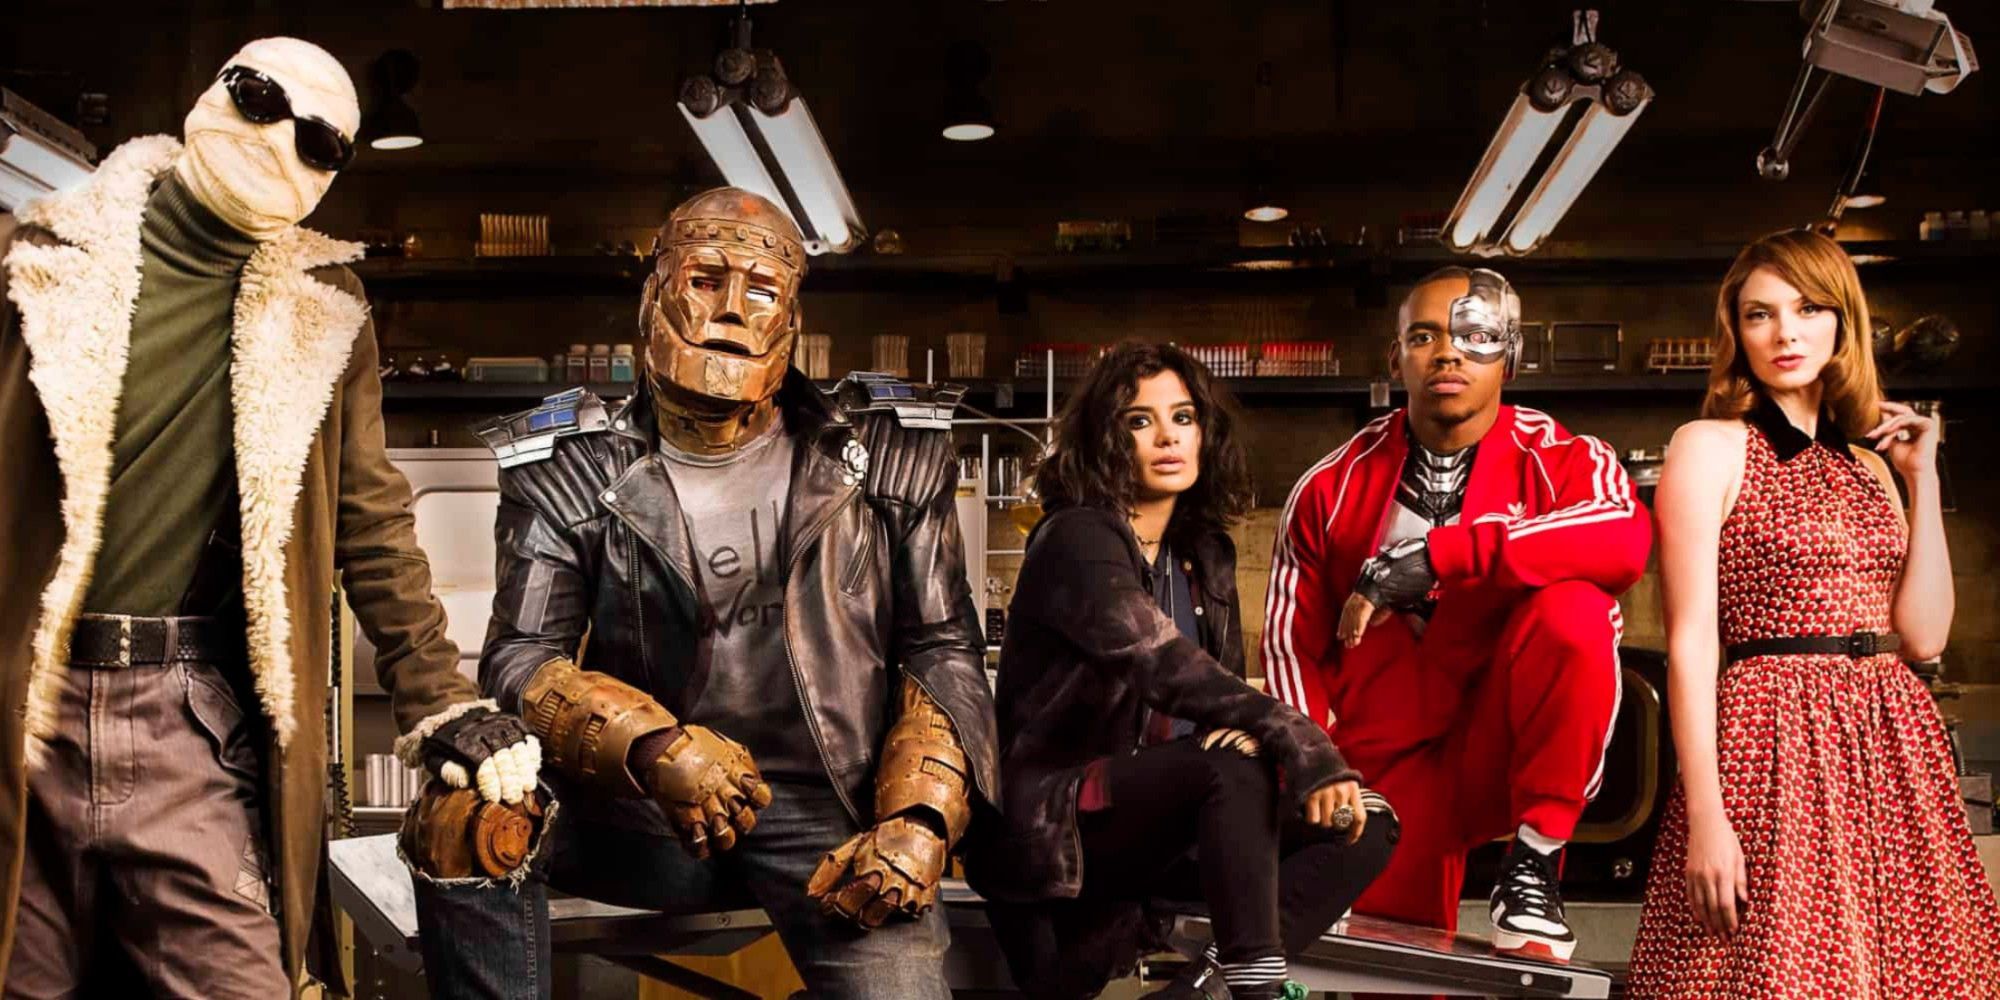 The cast of the Doom Patrol TV series includes Negative Man, Cyborg, Crazy Jane, Cyborg and Bouncy Girl.